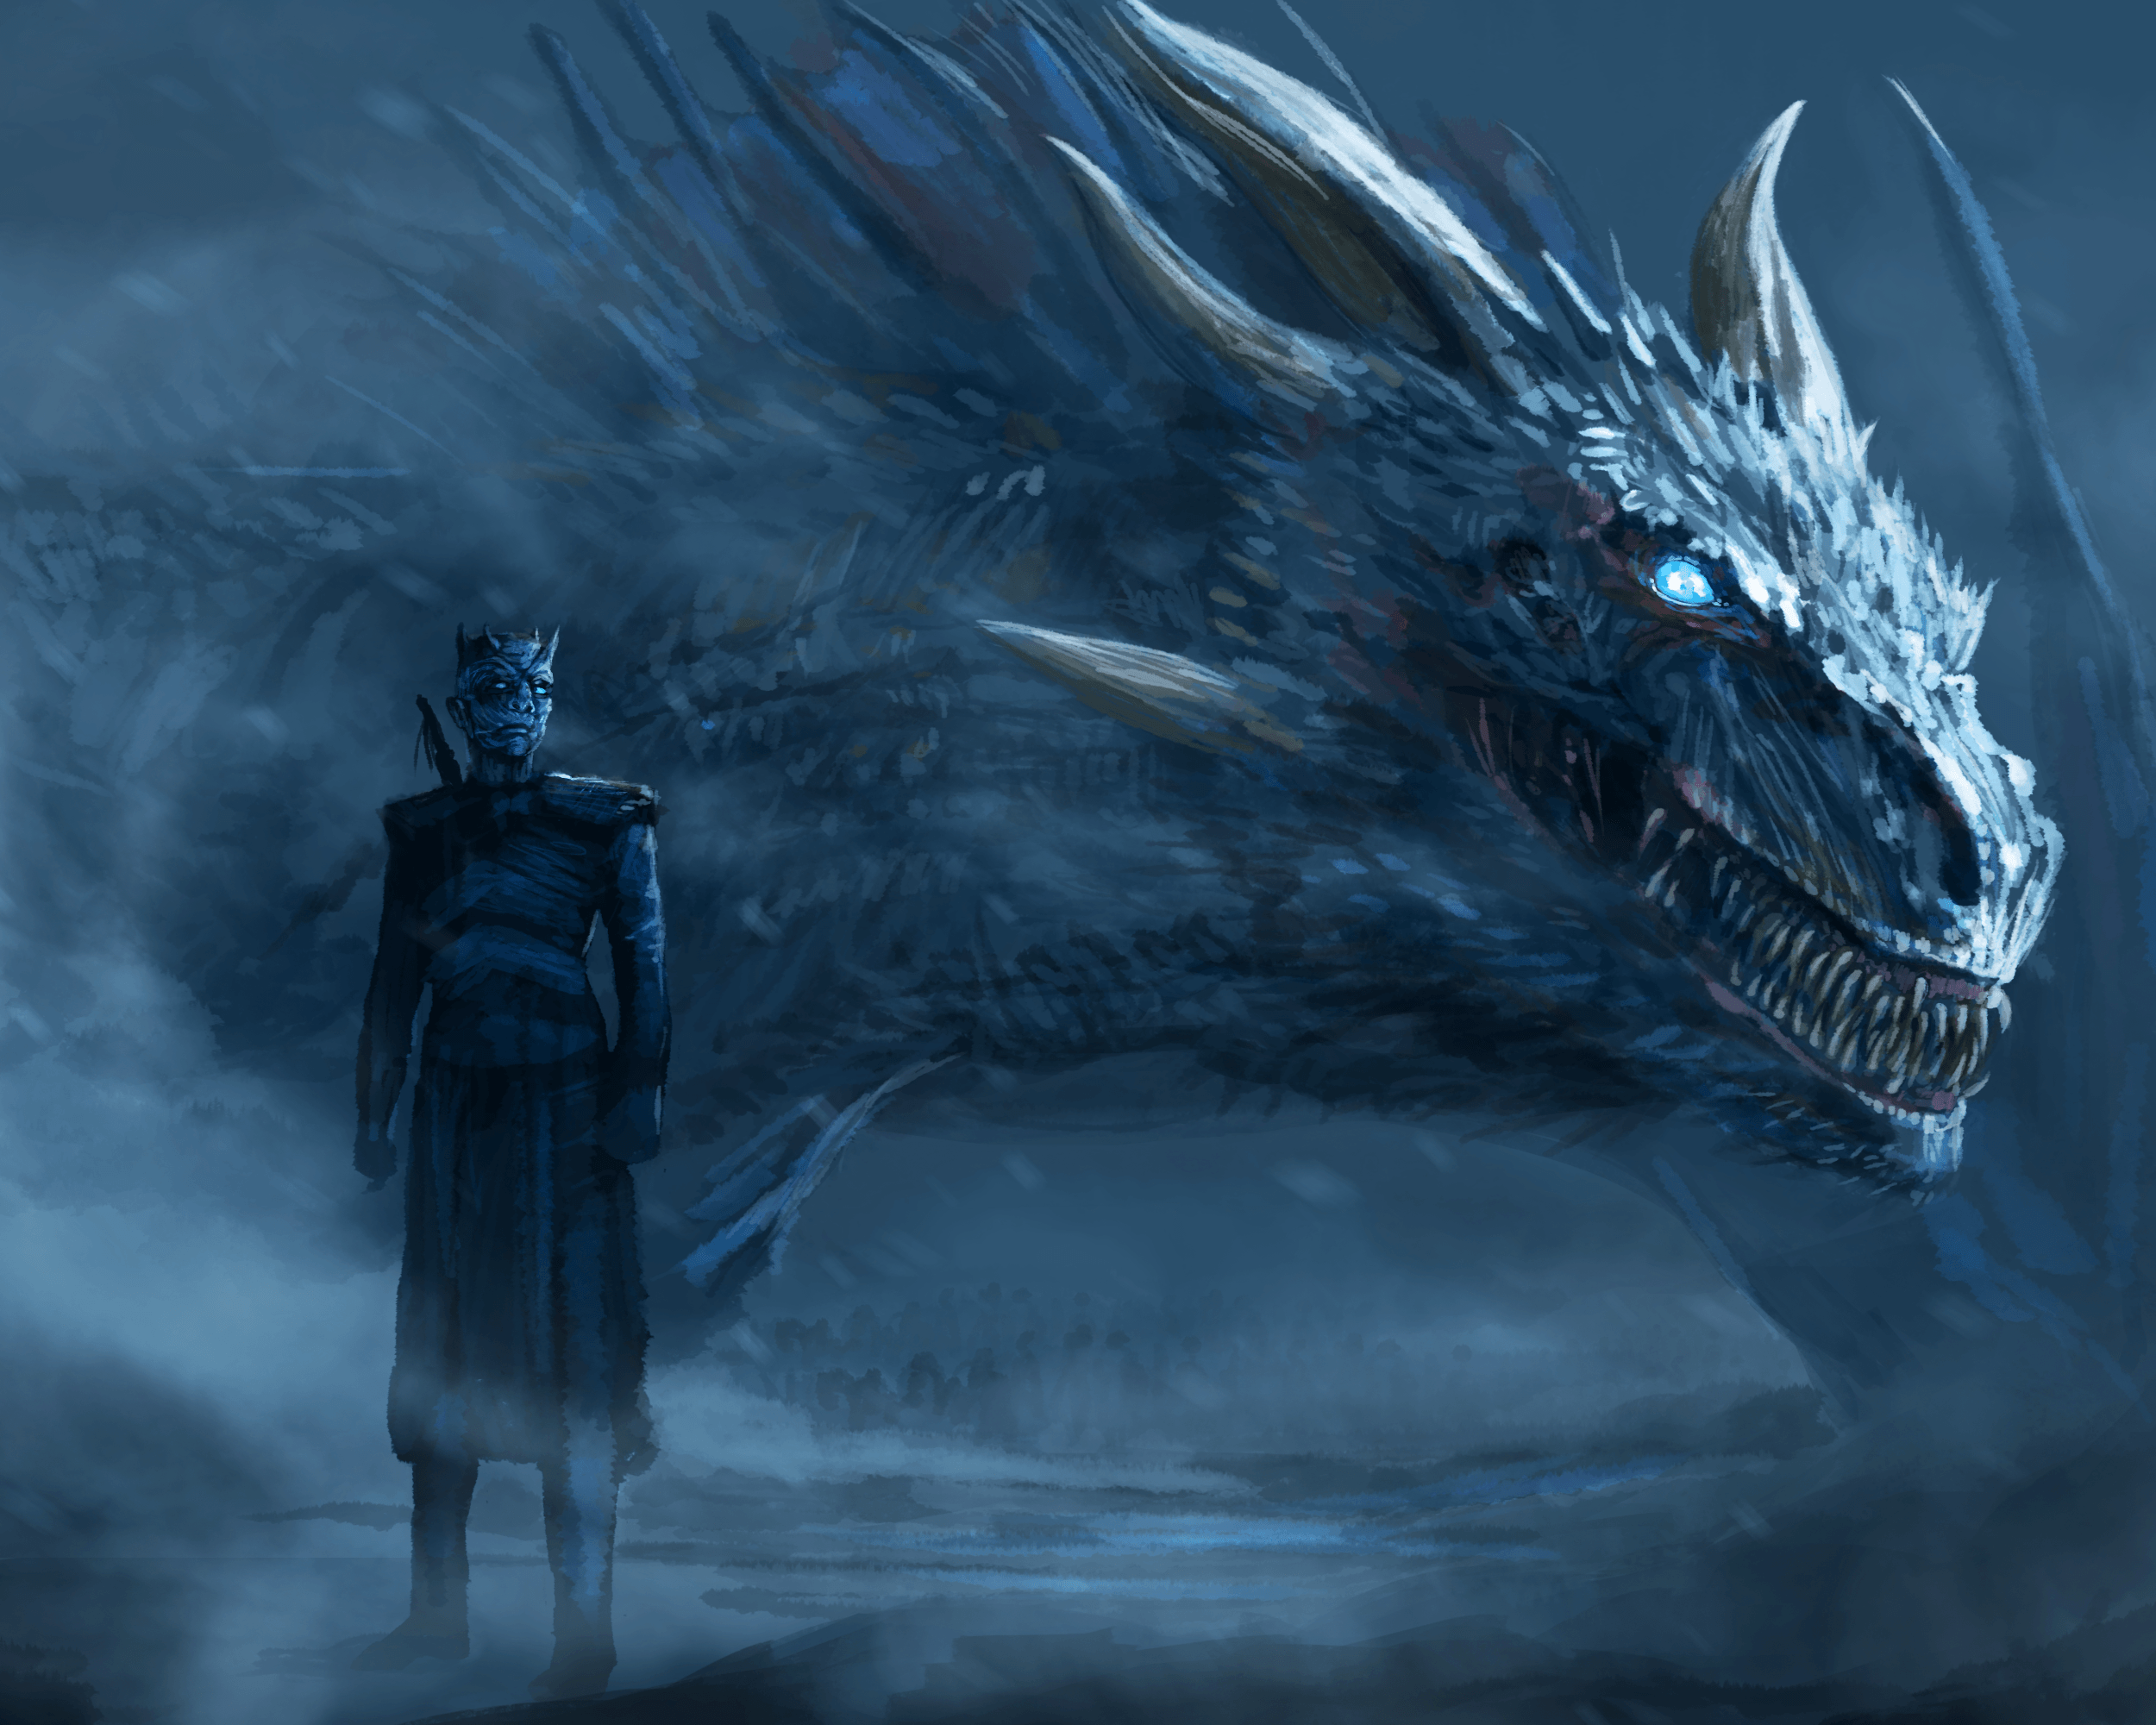 Ice Dragon Game of Thrones Wallpaper Free Ice Dragon Game of Thrones Background. Ice dragon game of thrones, Game of thrones dragons, Dragon games